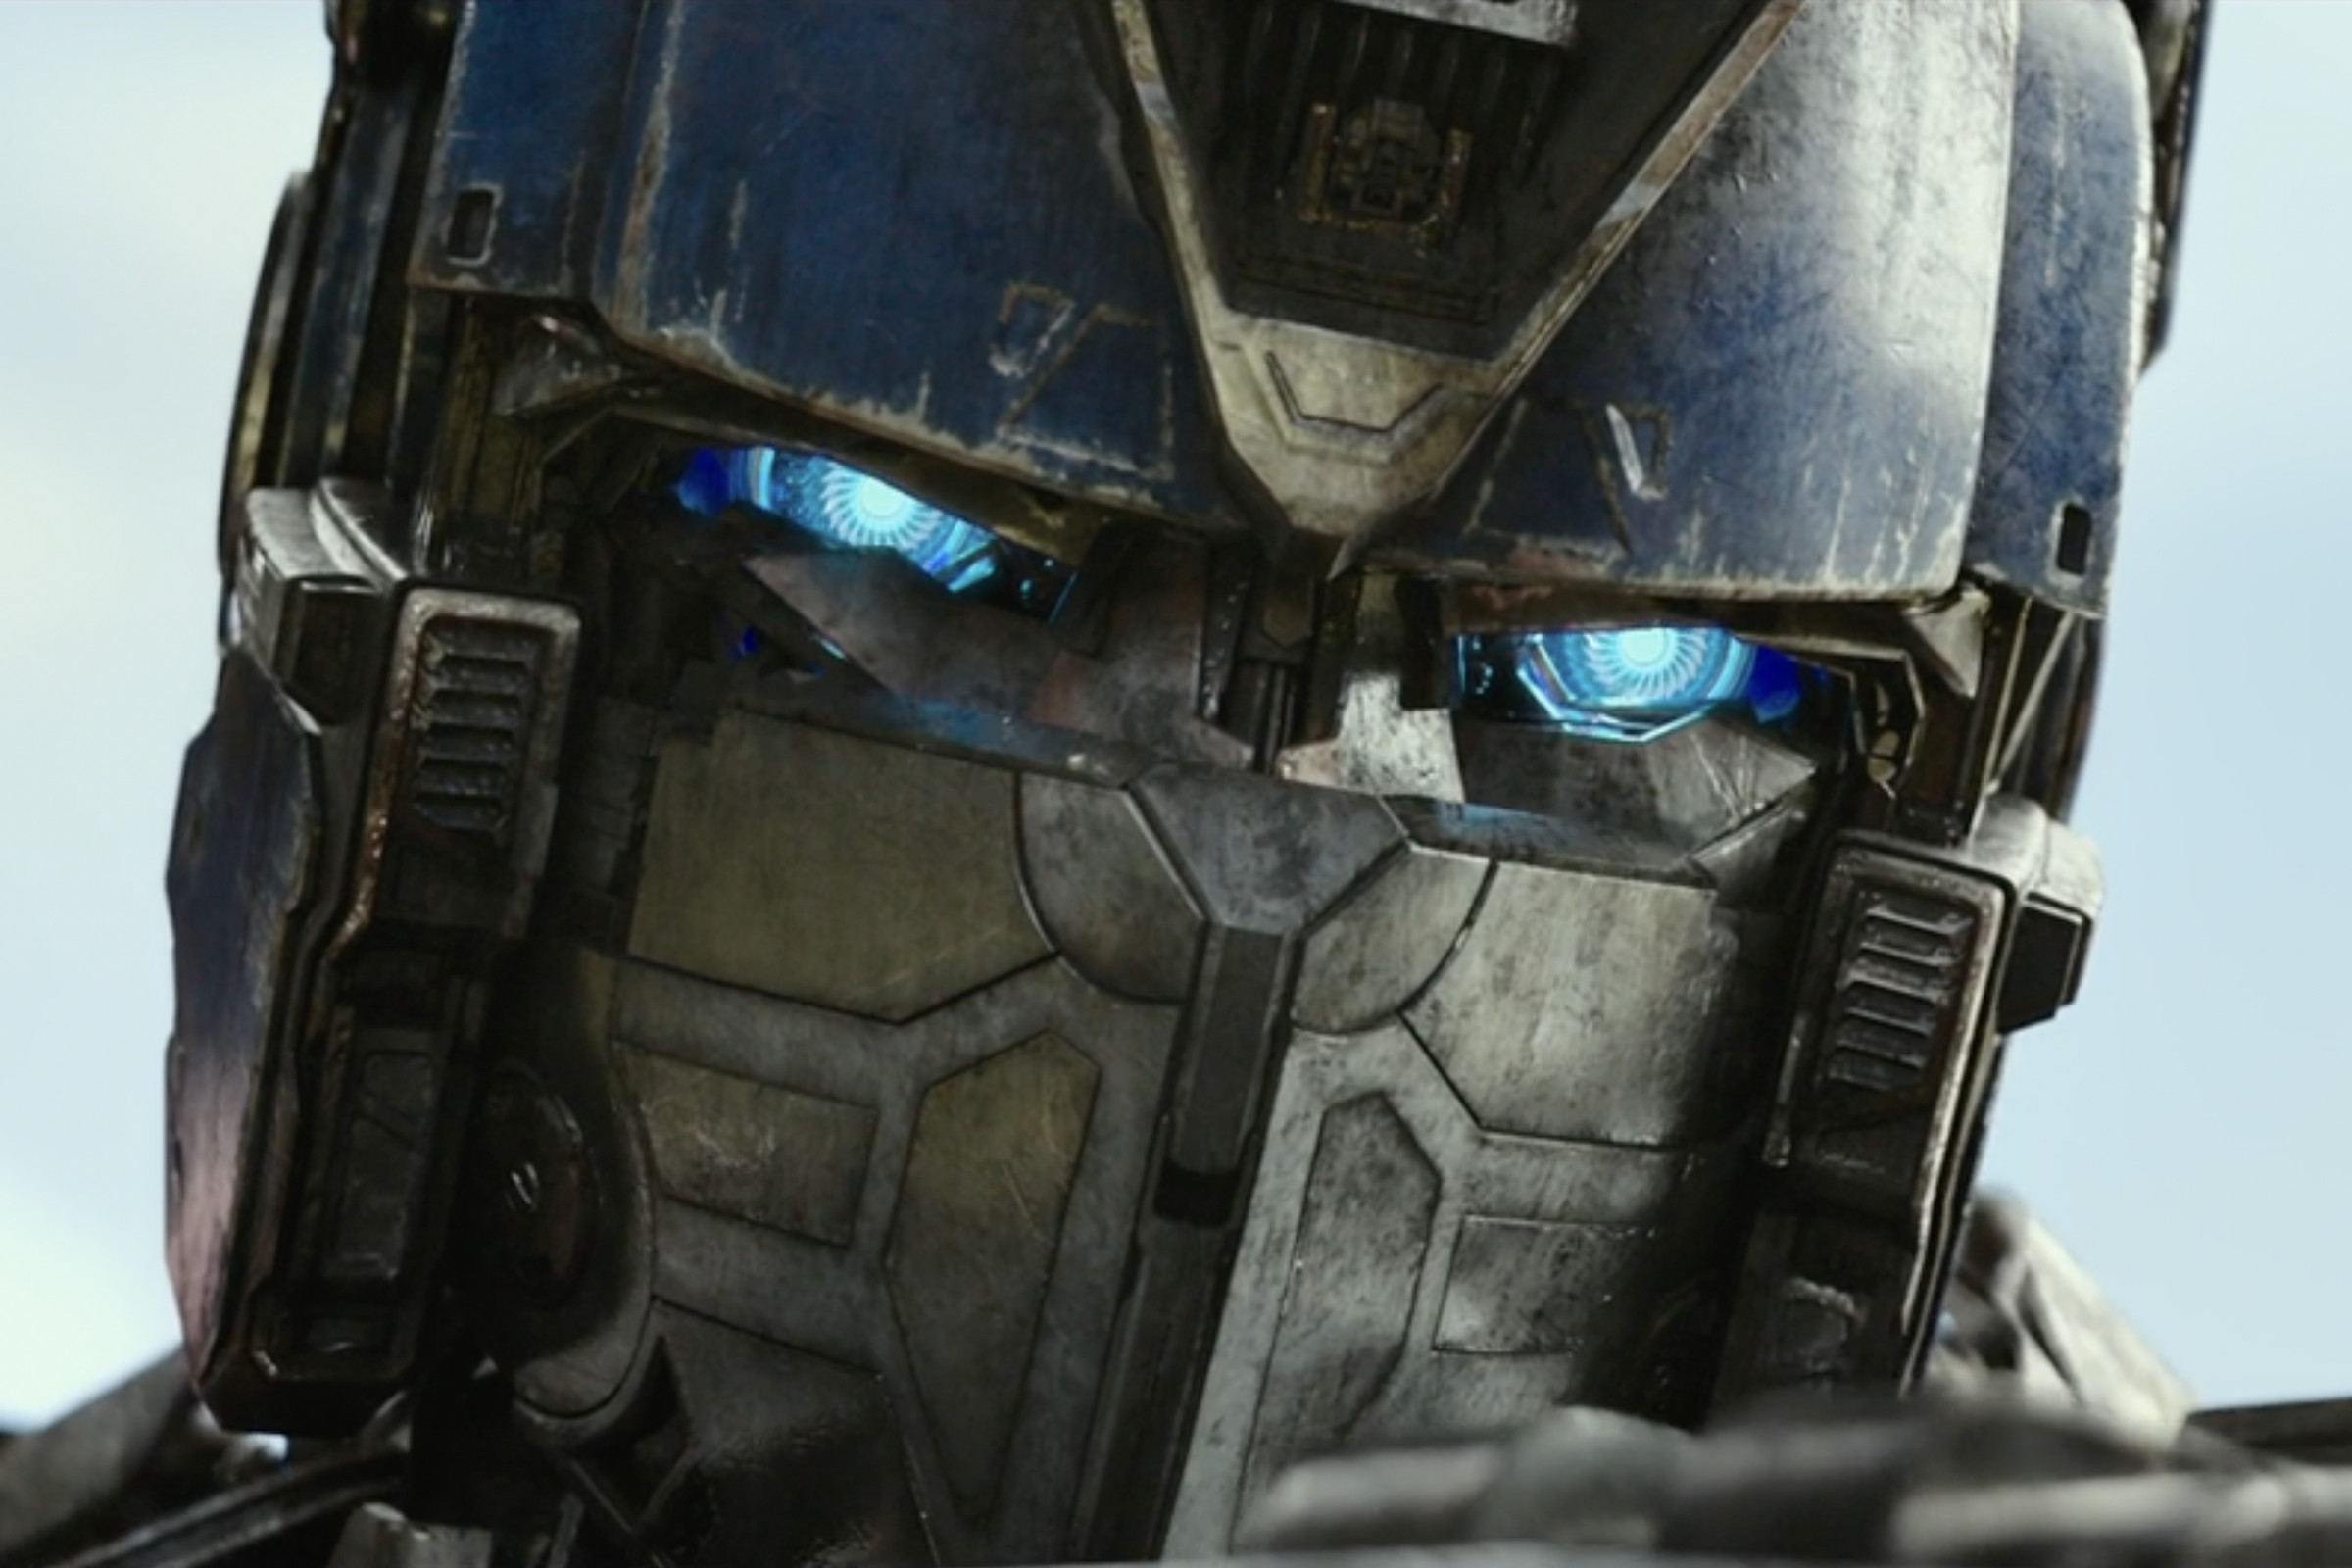 The head of a humanoid robot, the upper-half of which is blue, and the low half of which is gunmetal gray.